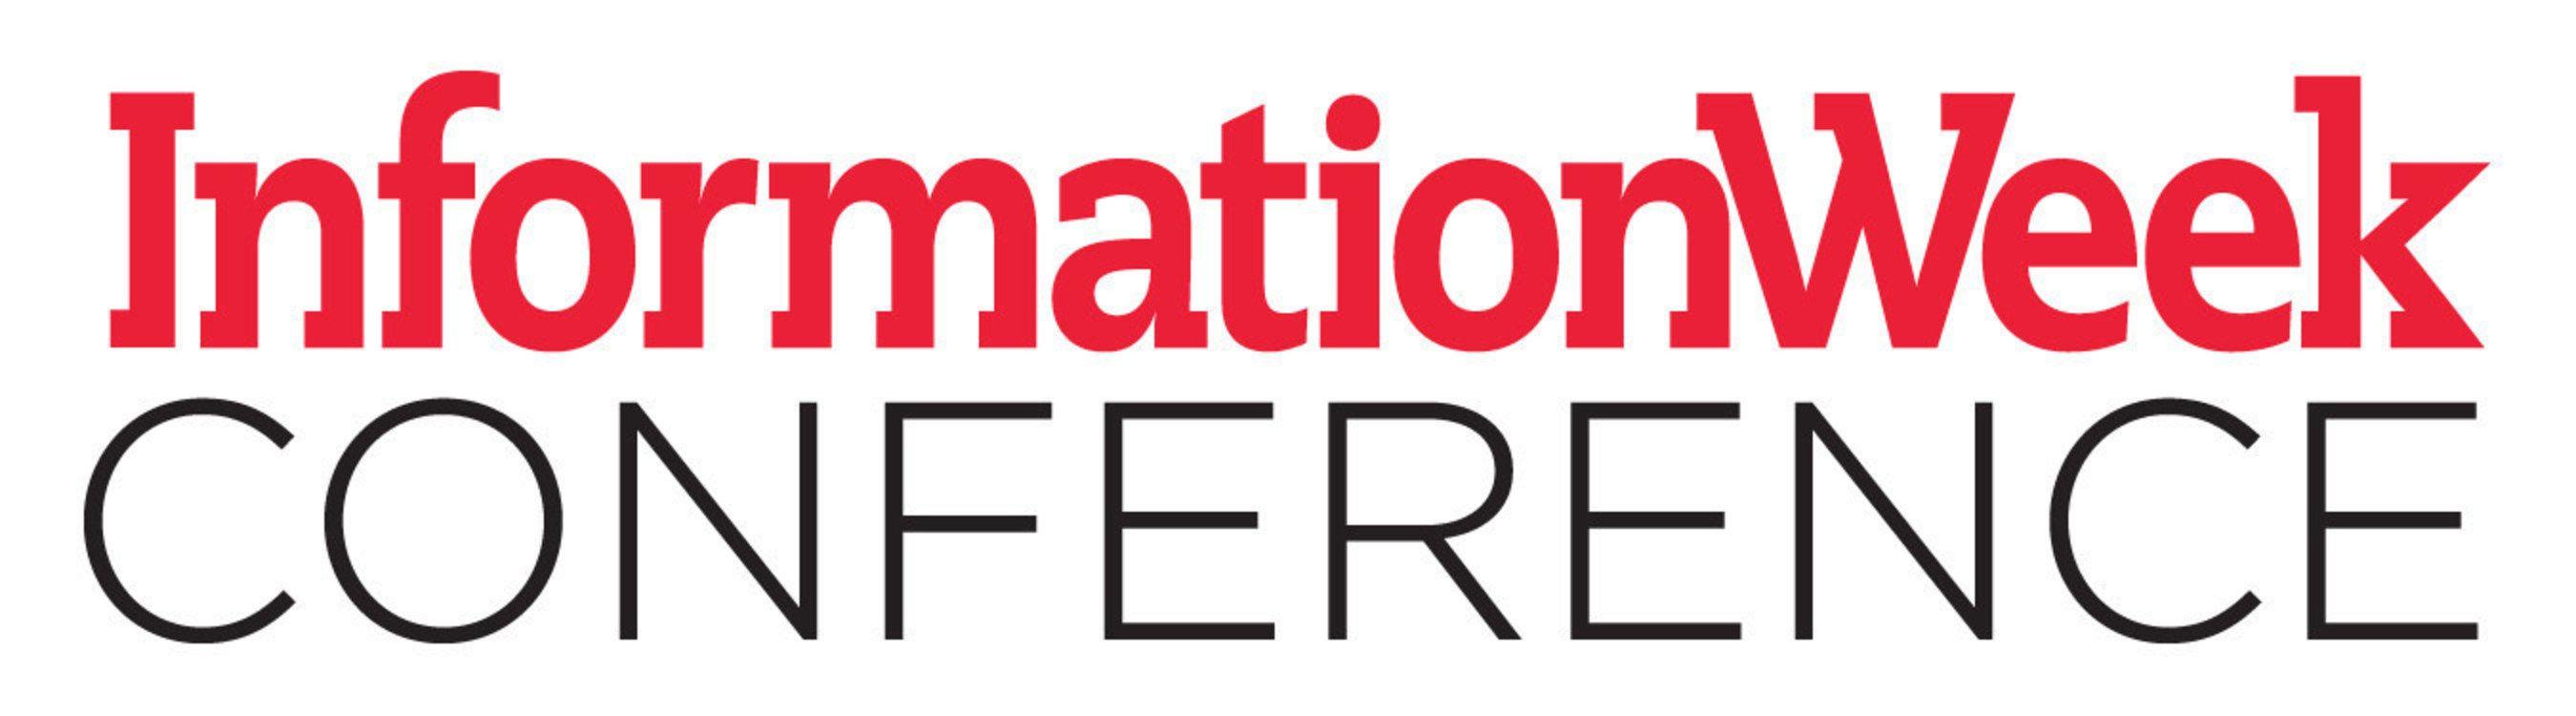 InformationWeek Logo - IT Without Borders: InformationWeek Conference Launches 2015 Program ...